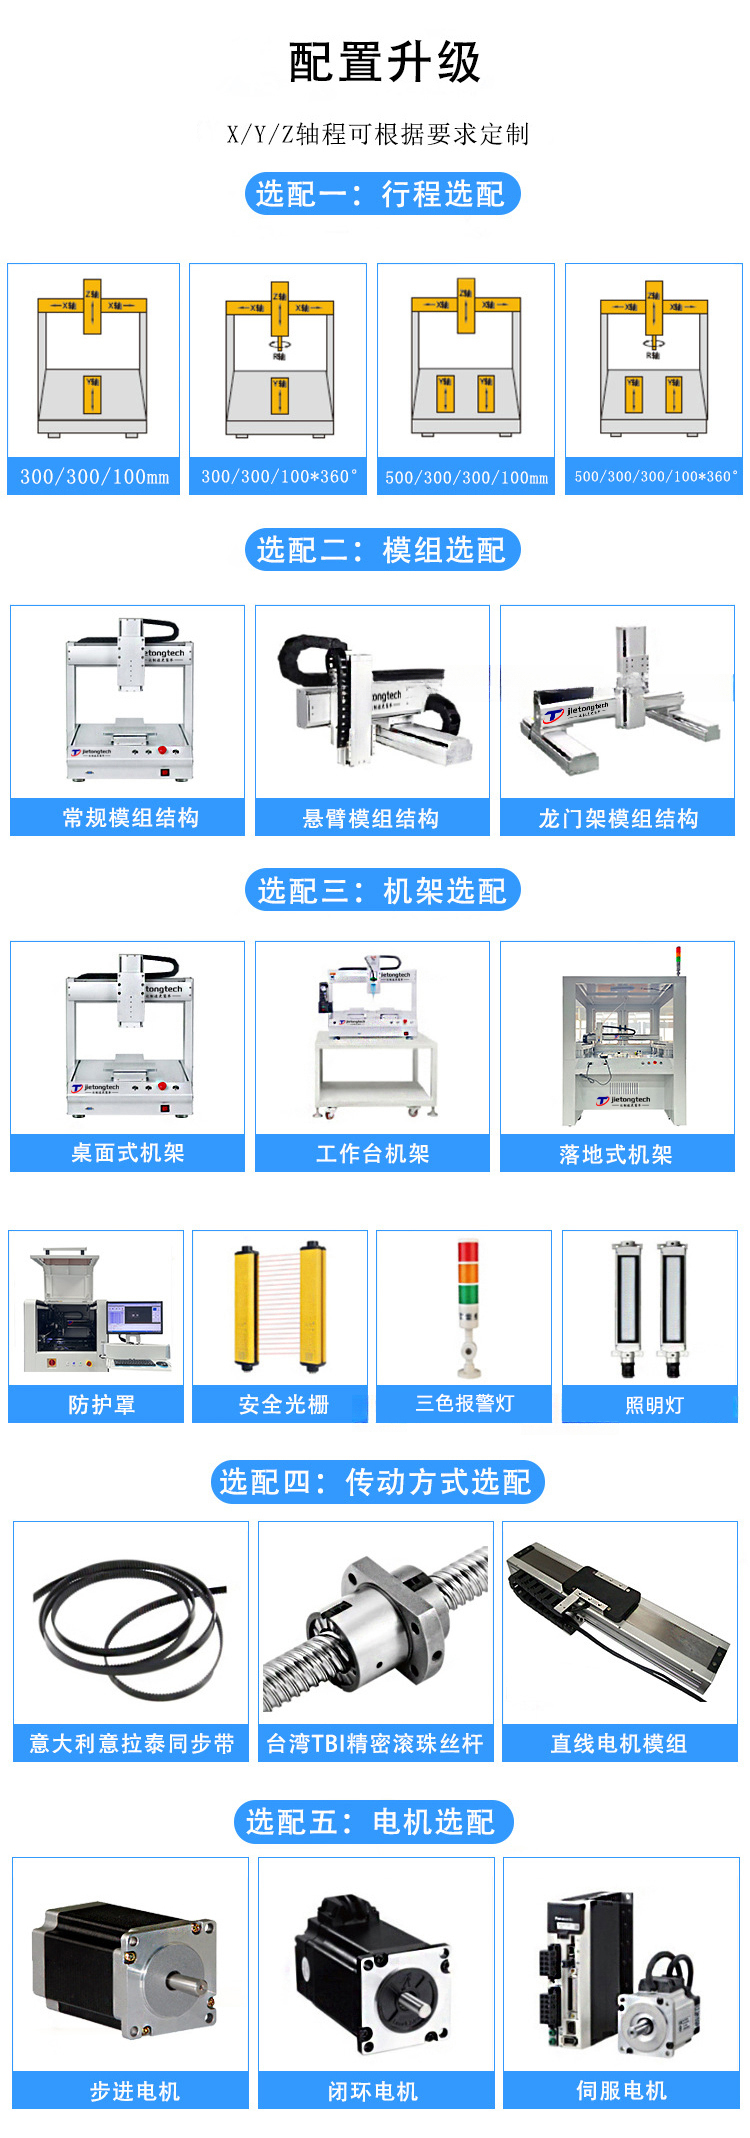 Charger single head dual station PCBA circuit board transformer switch fully automatic spot welding LED light USB soldering machine